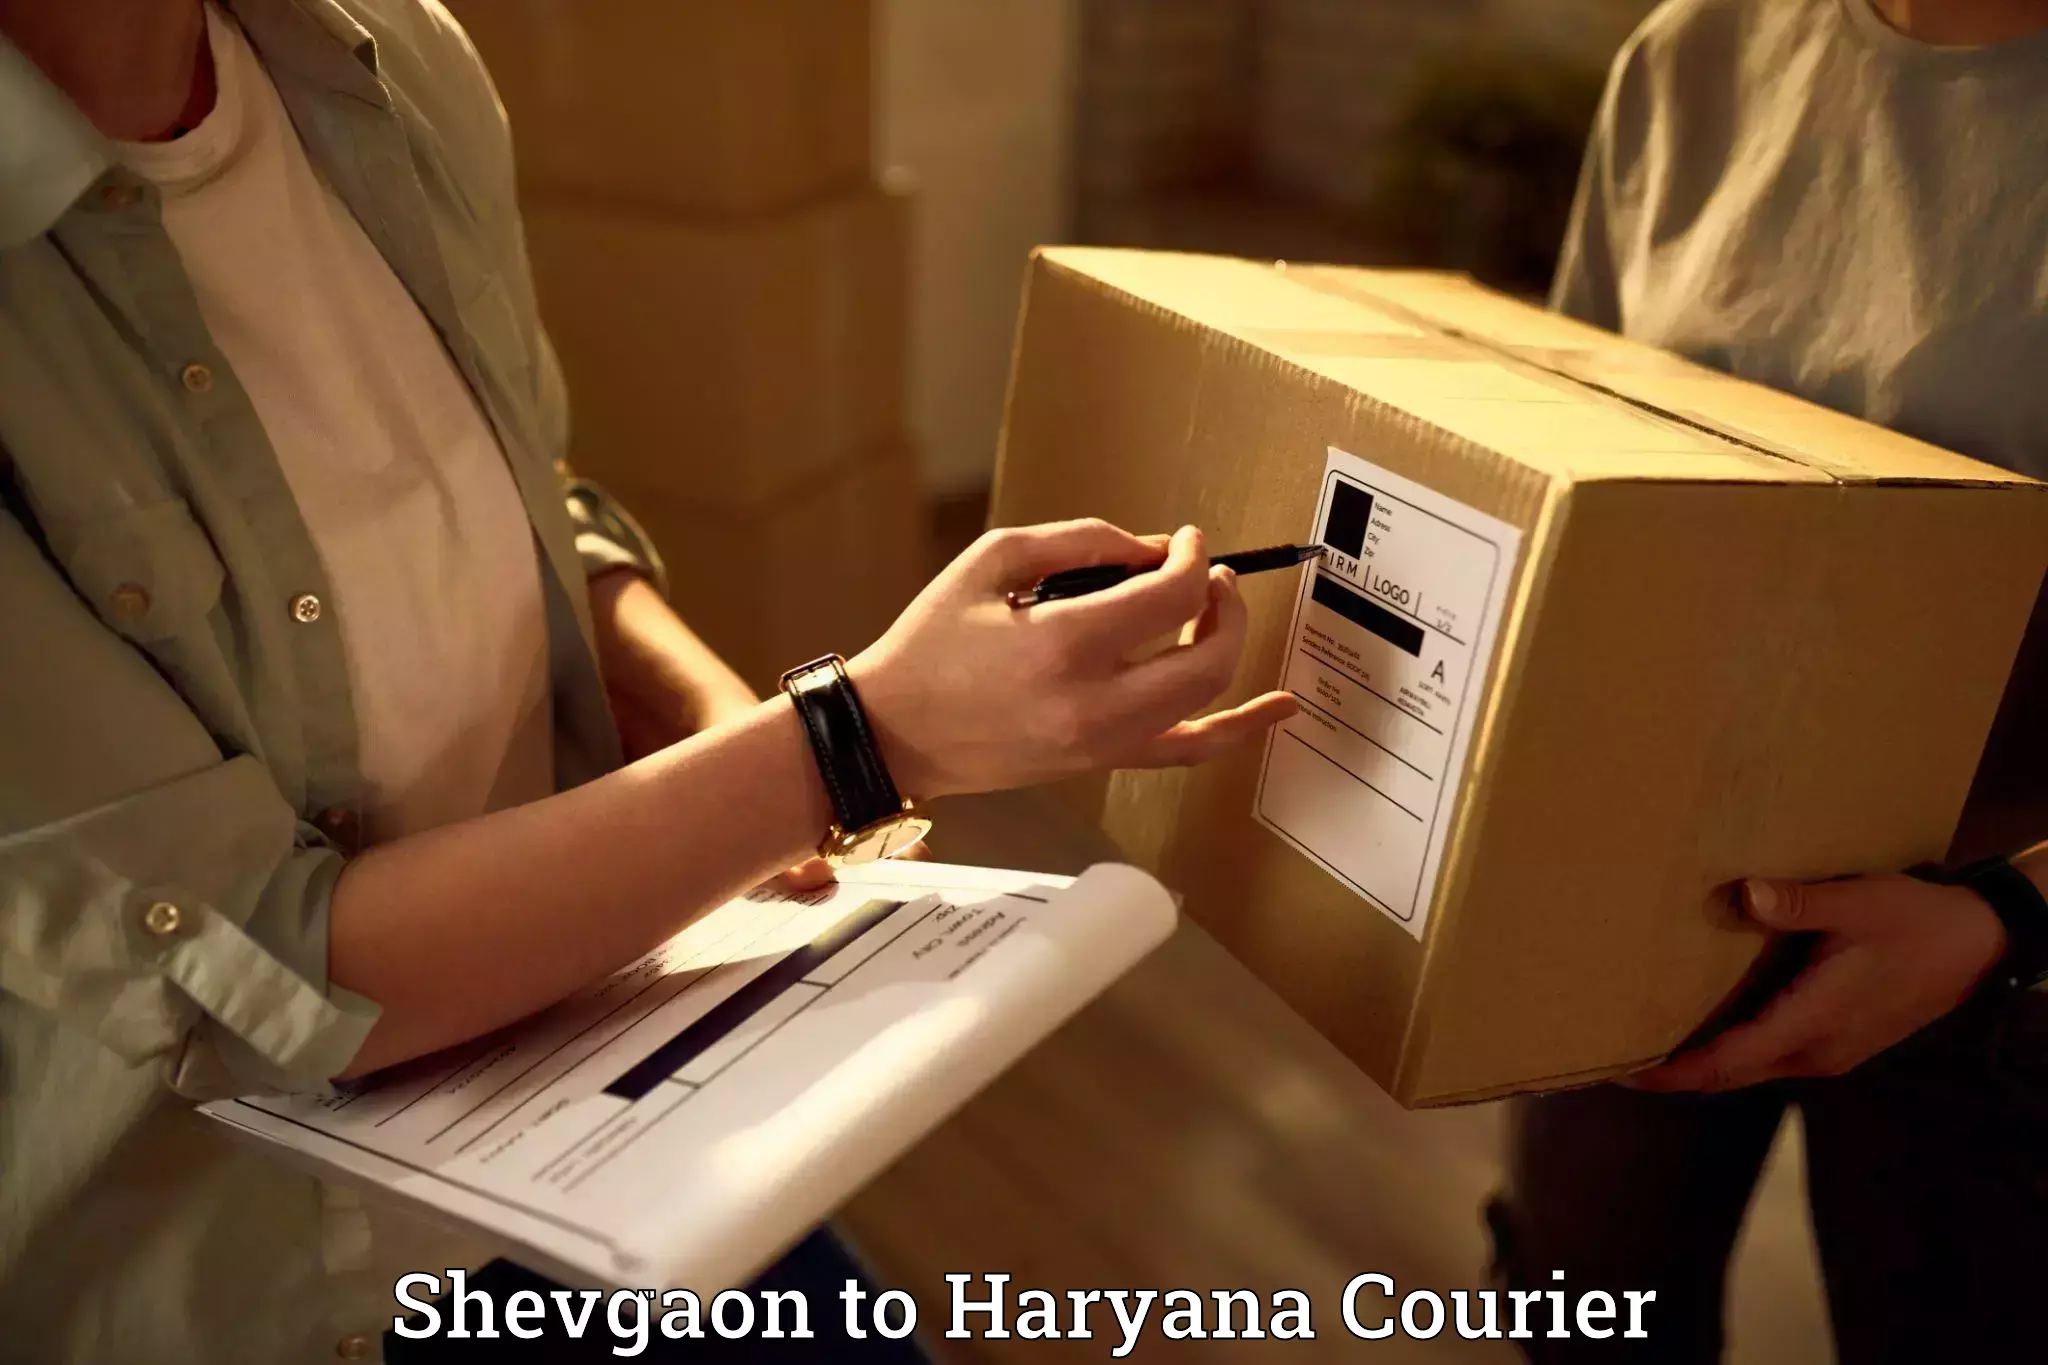 Trusted home movers Shevgaon to Chaudhary Charan Singh Haryana Agricultural University Hisar